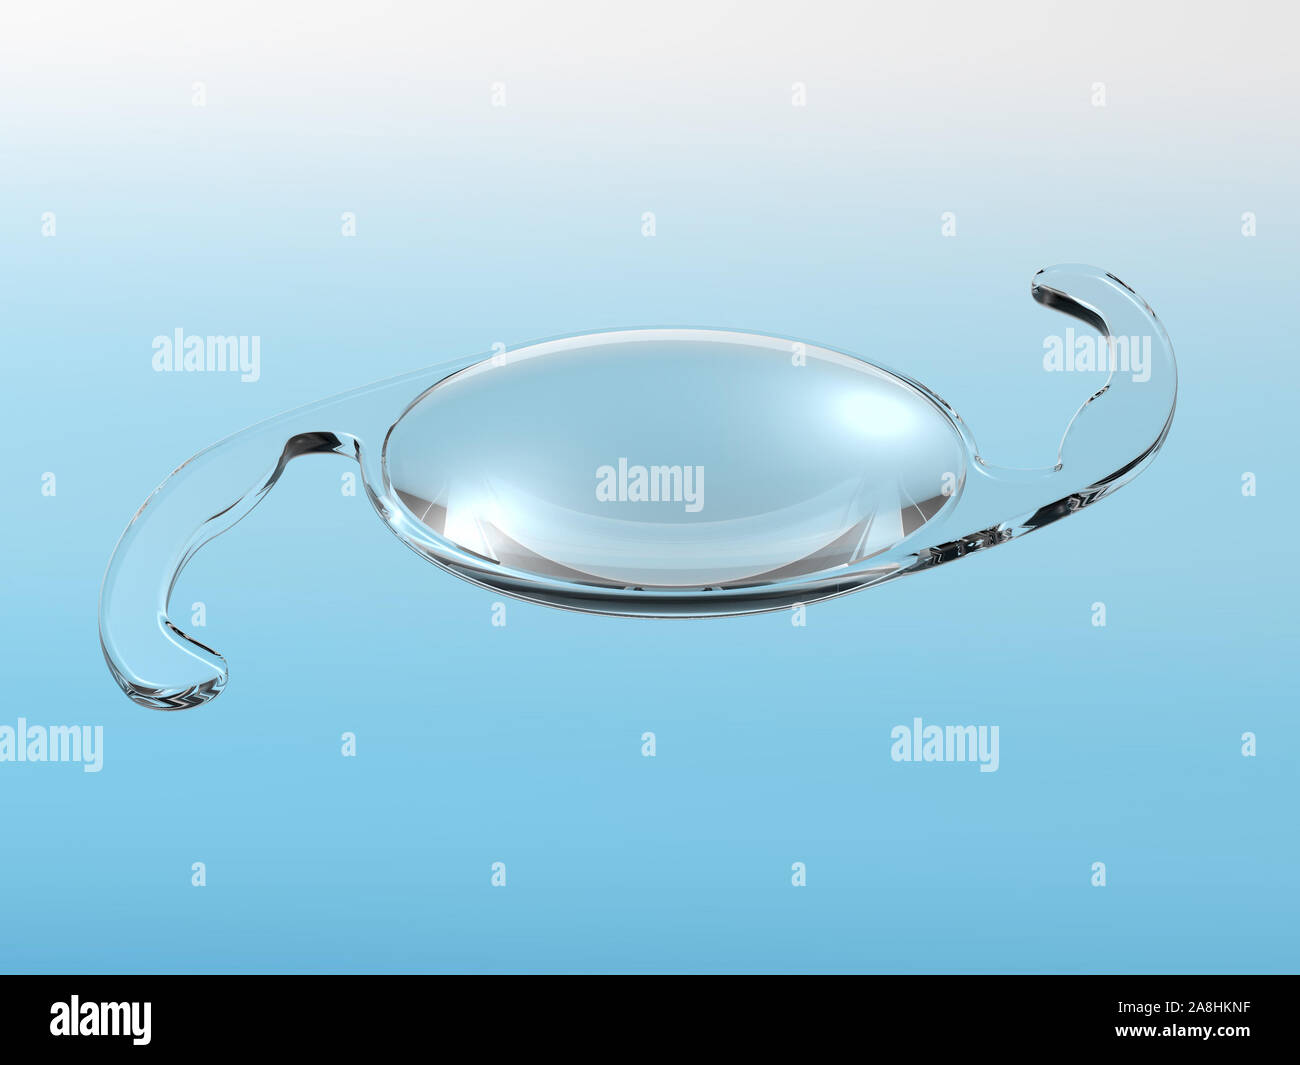 Medical 3D illustration showing a single Intraocular lens Stock Photo